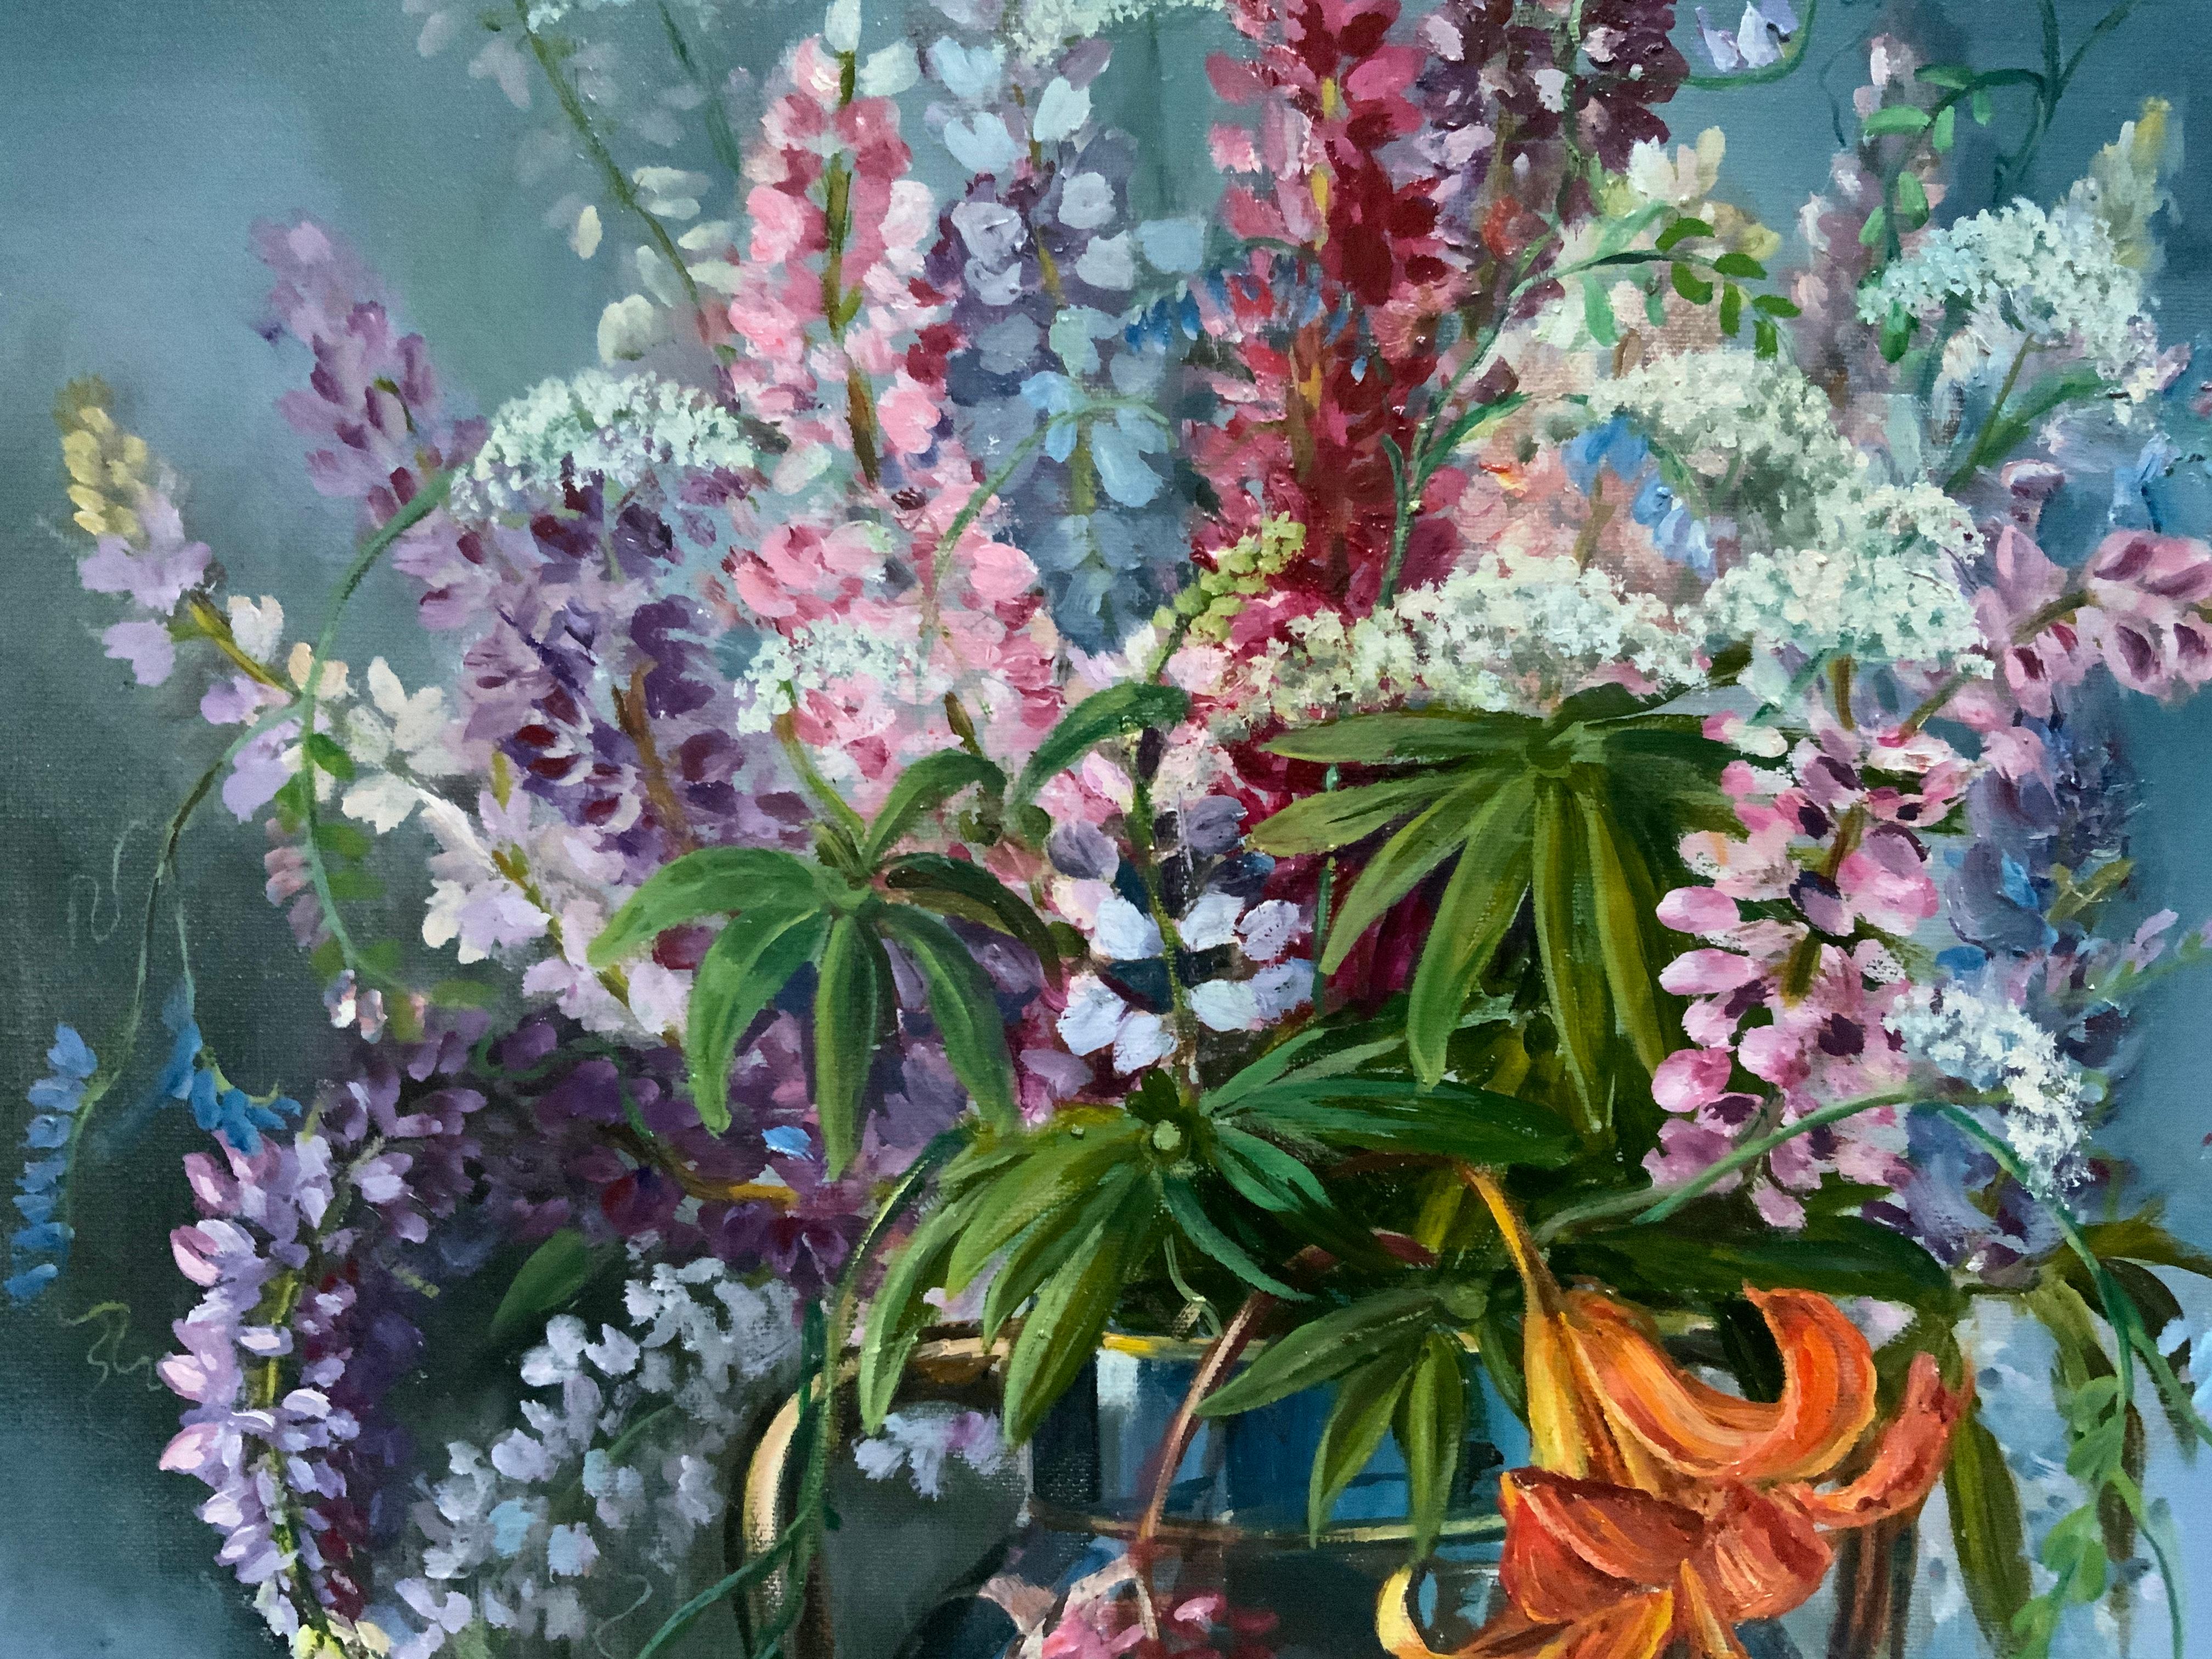 Lupines are simple garden flowers, but, according to the will of the artist, in this painting they turn into a luxurious and fresh bouquet! The beautiful vase not only complements the natural theme, but is itself a work of art, complementing and